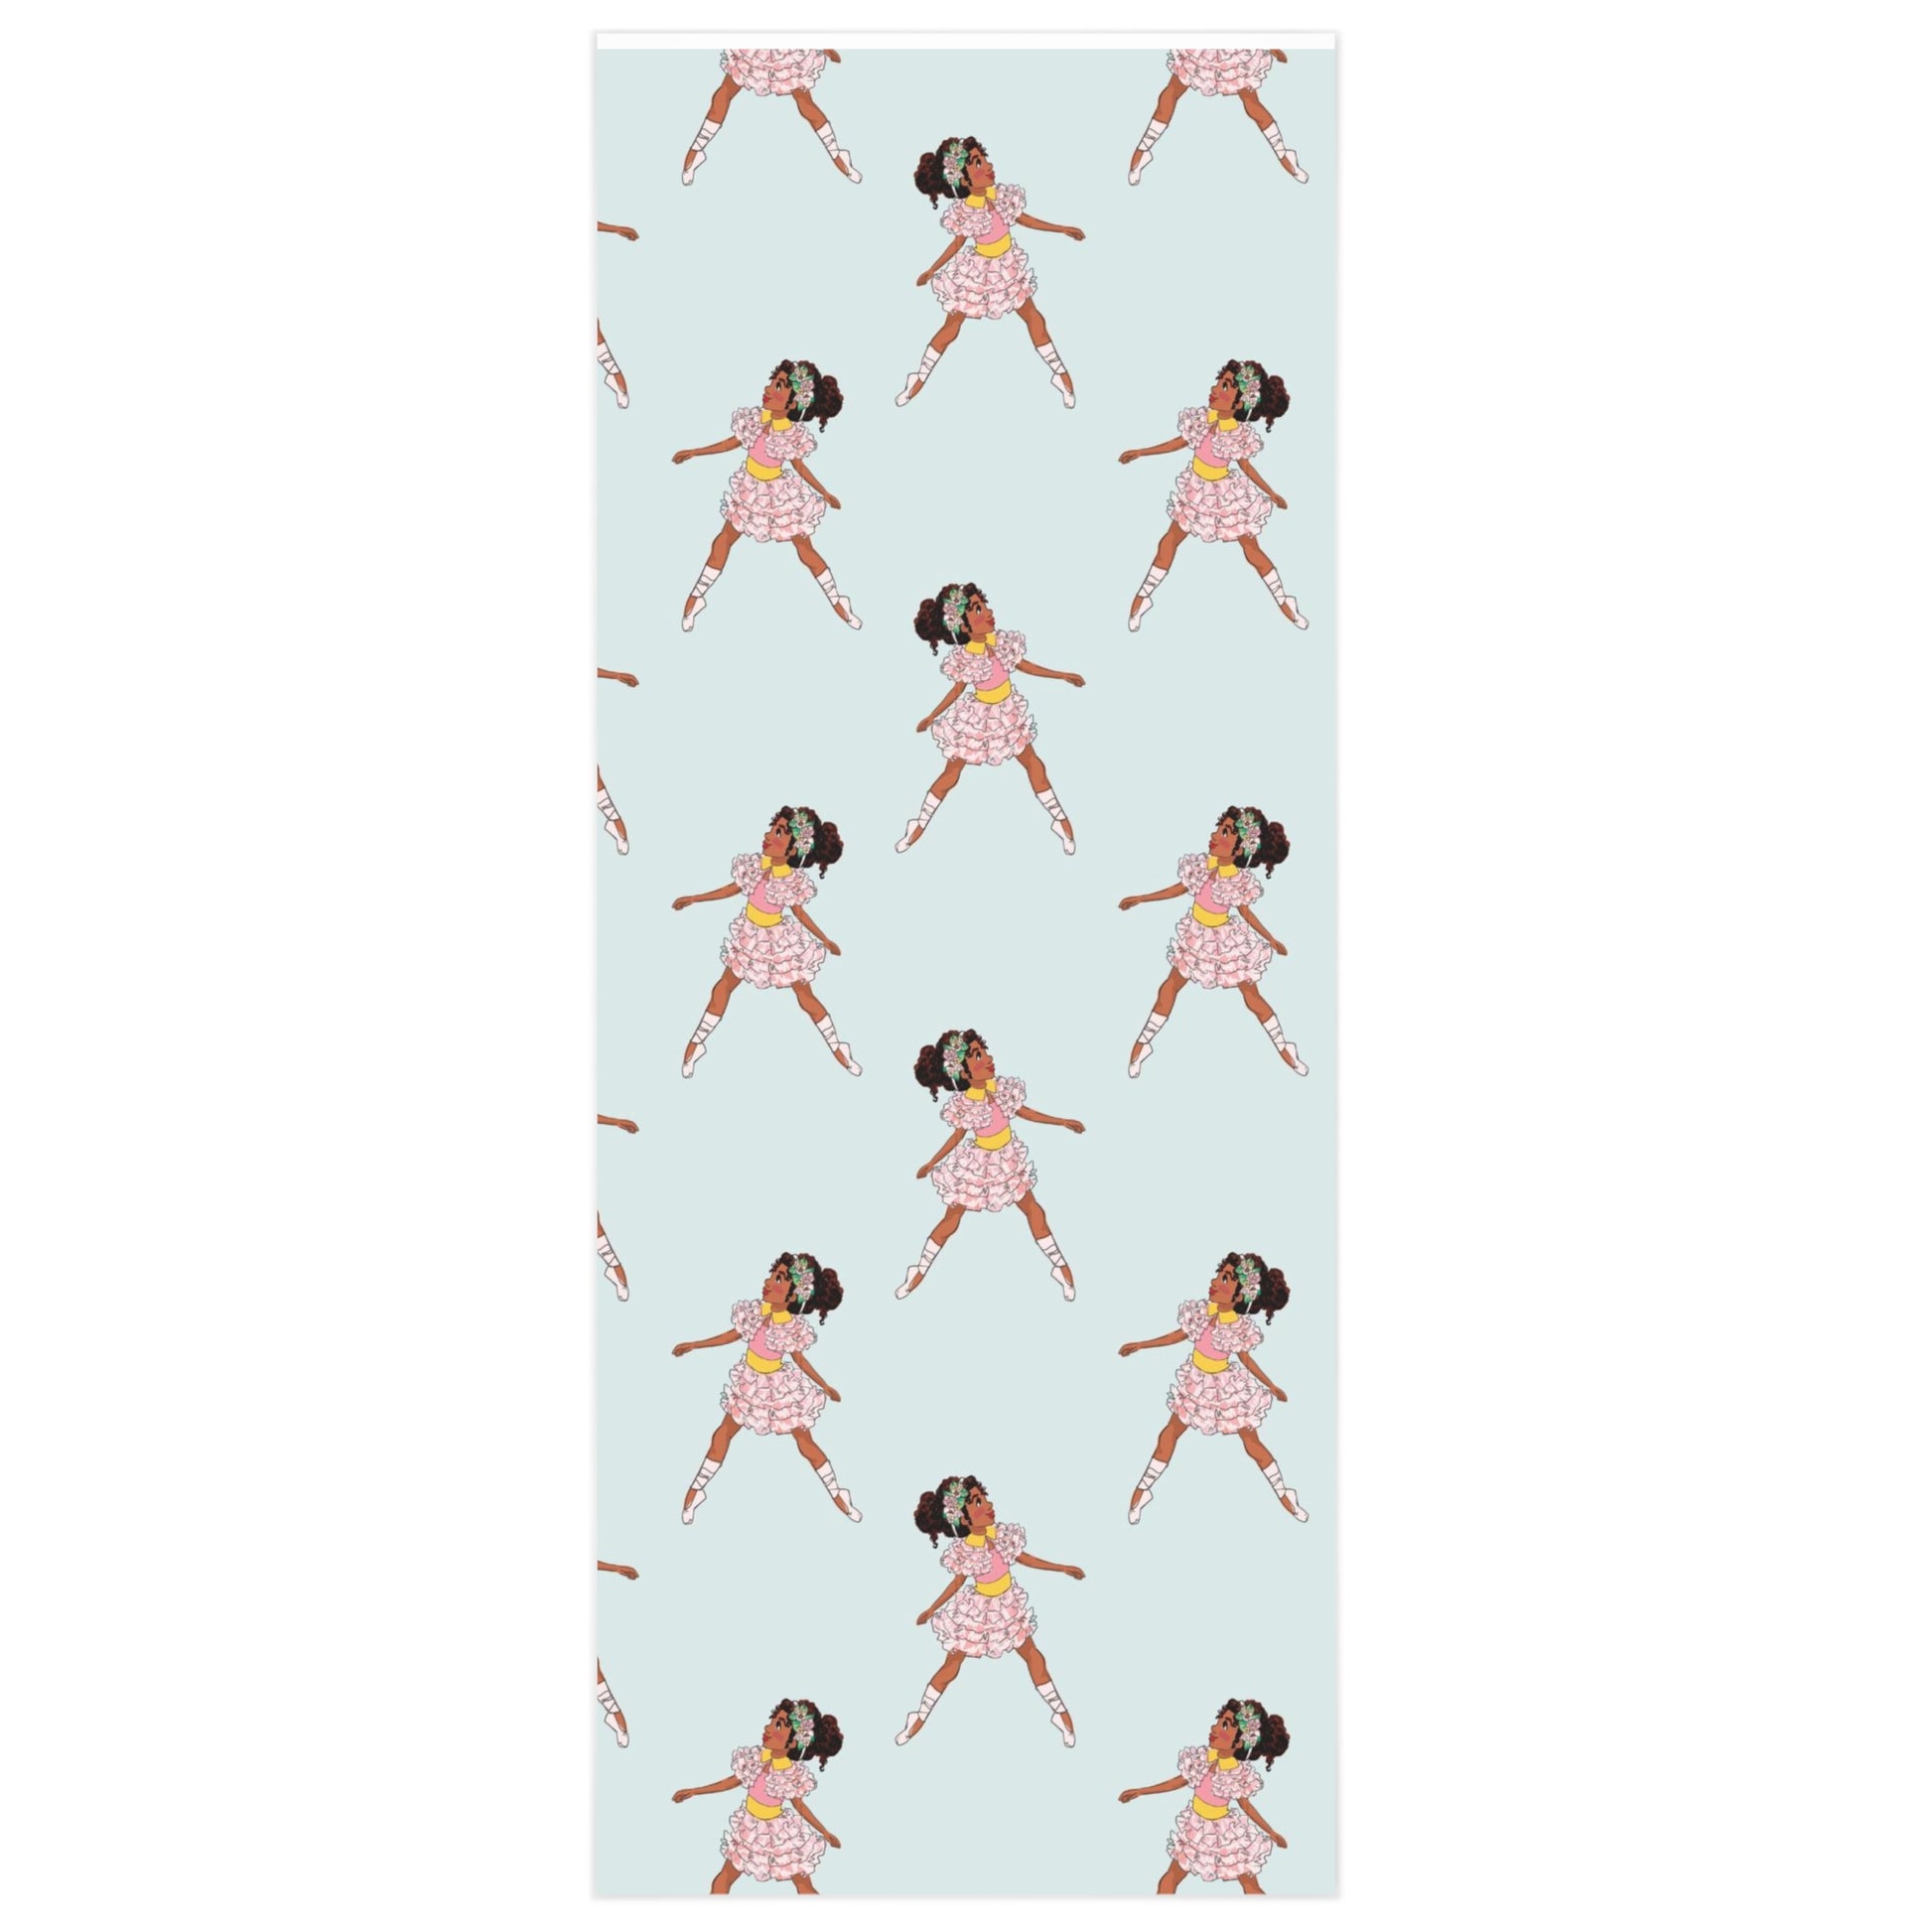 Ballerina Gift Wrapping Paper